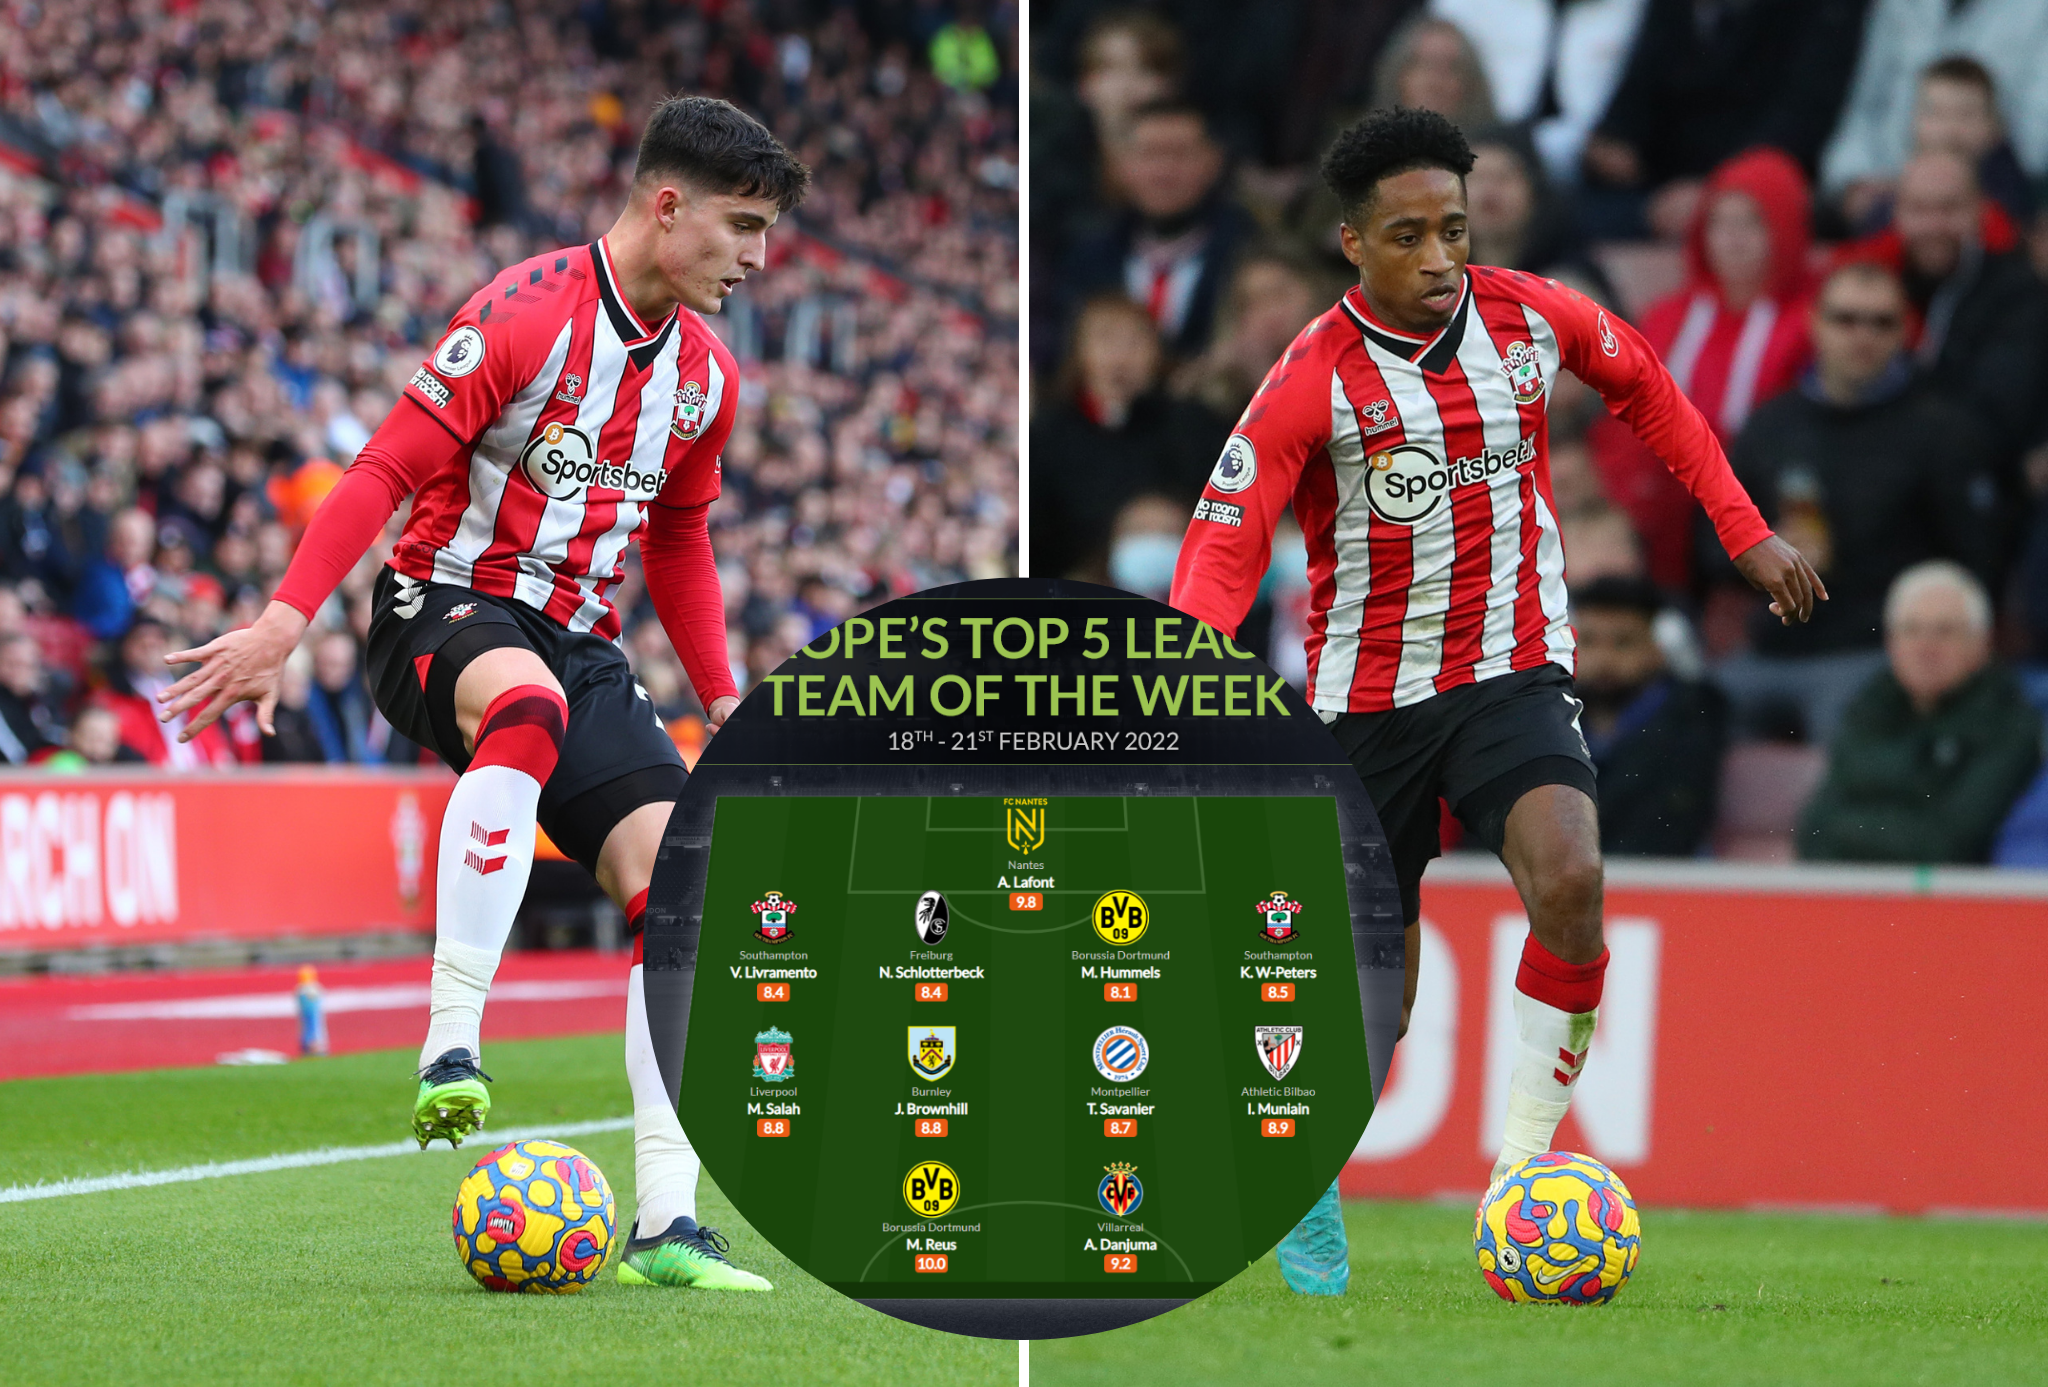 Saints duo amongst best performers in Europe at the weekend